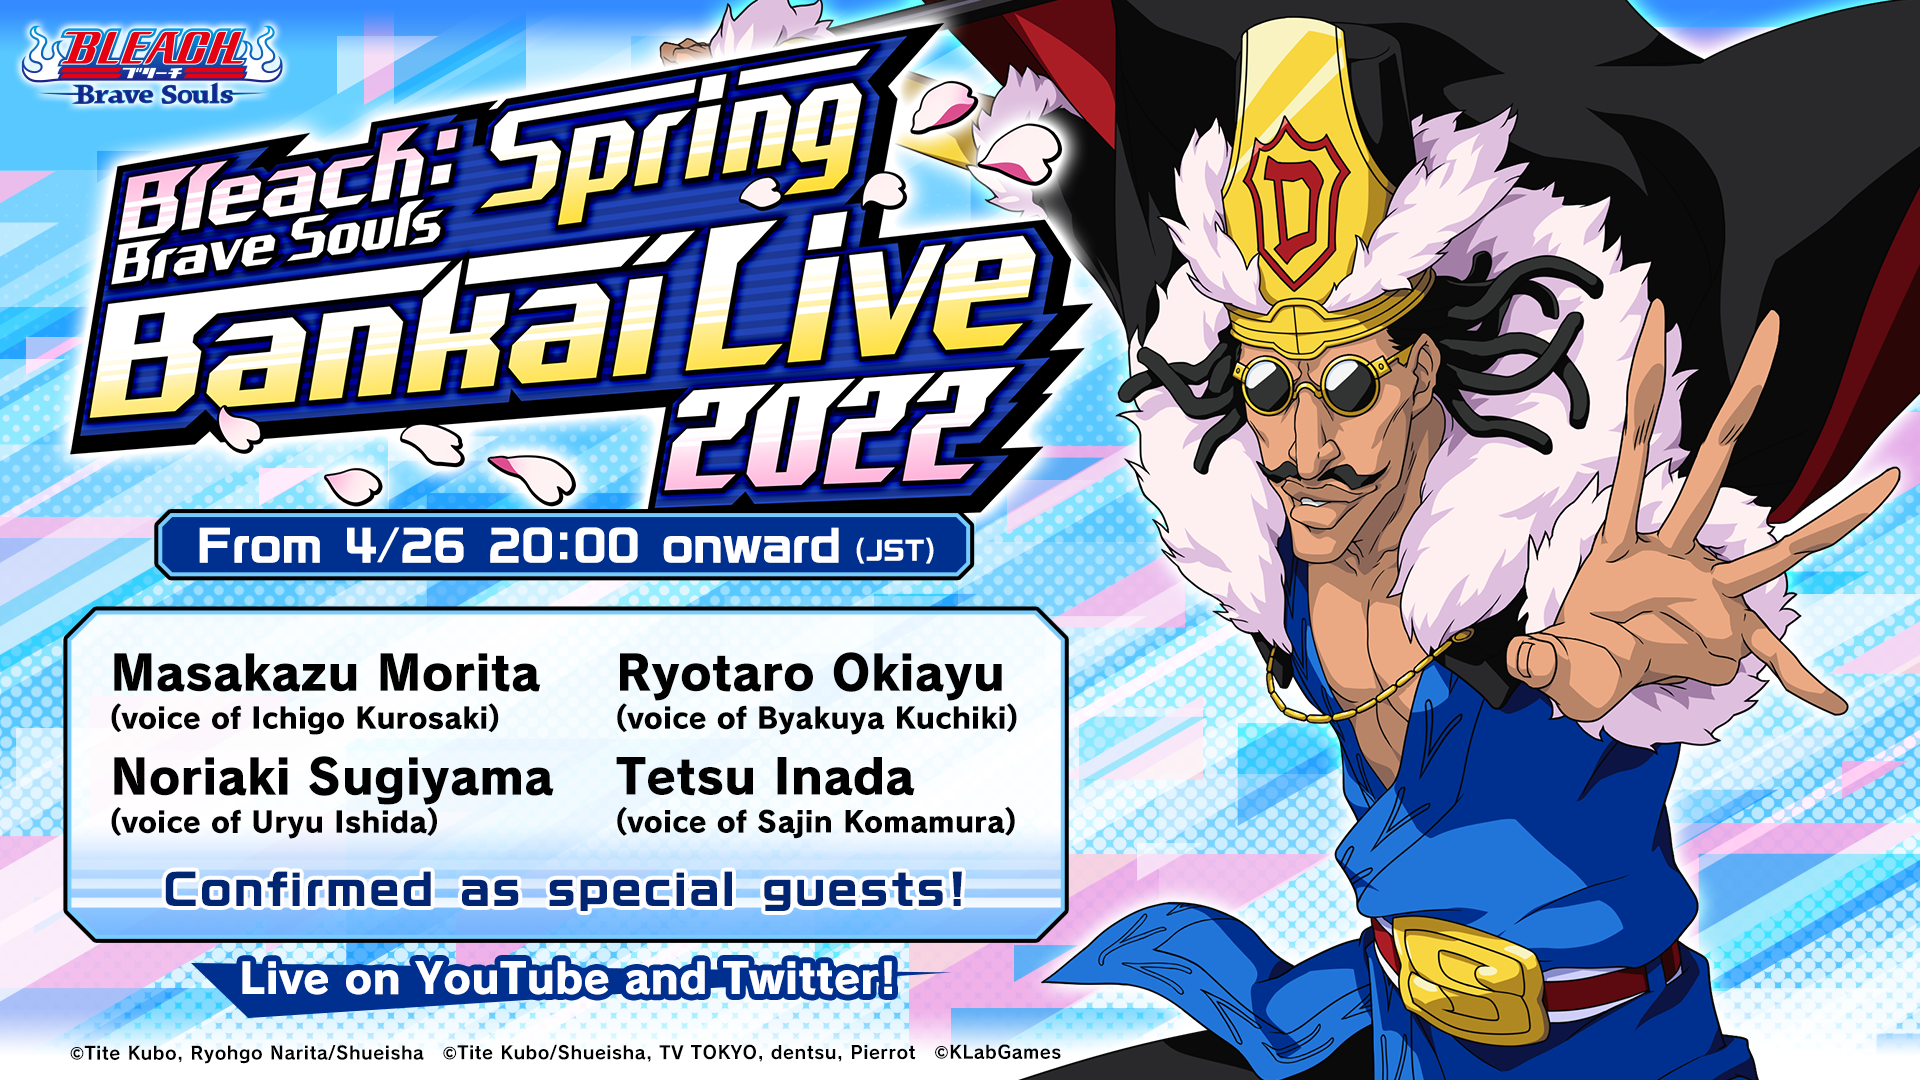 stretch Patent Distraction Bleach: Brave Souls" Spring Bankai Live 2022 on Tuesday, April 26!  Featuring a Cast of Talented Voice Actors! | News | KLab.Inc